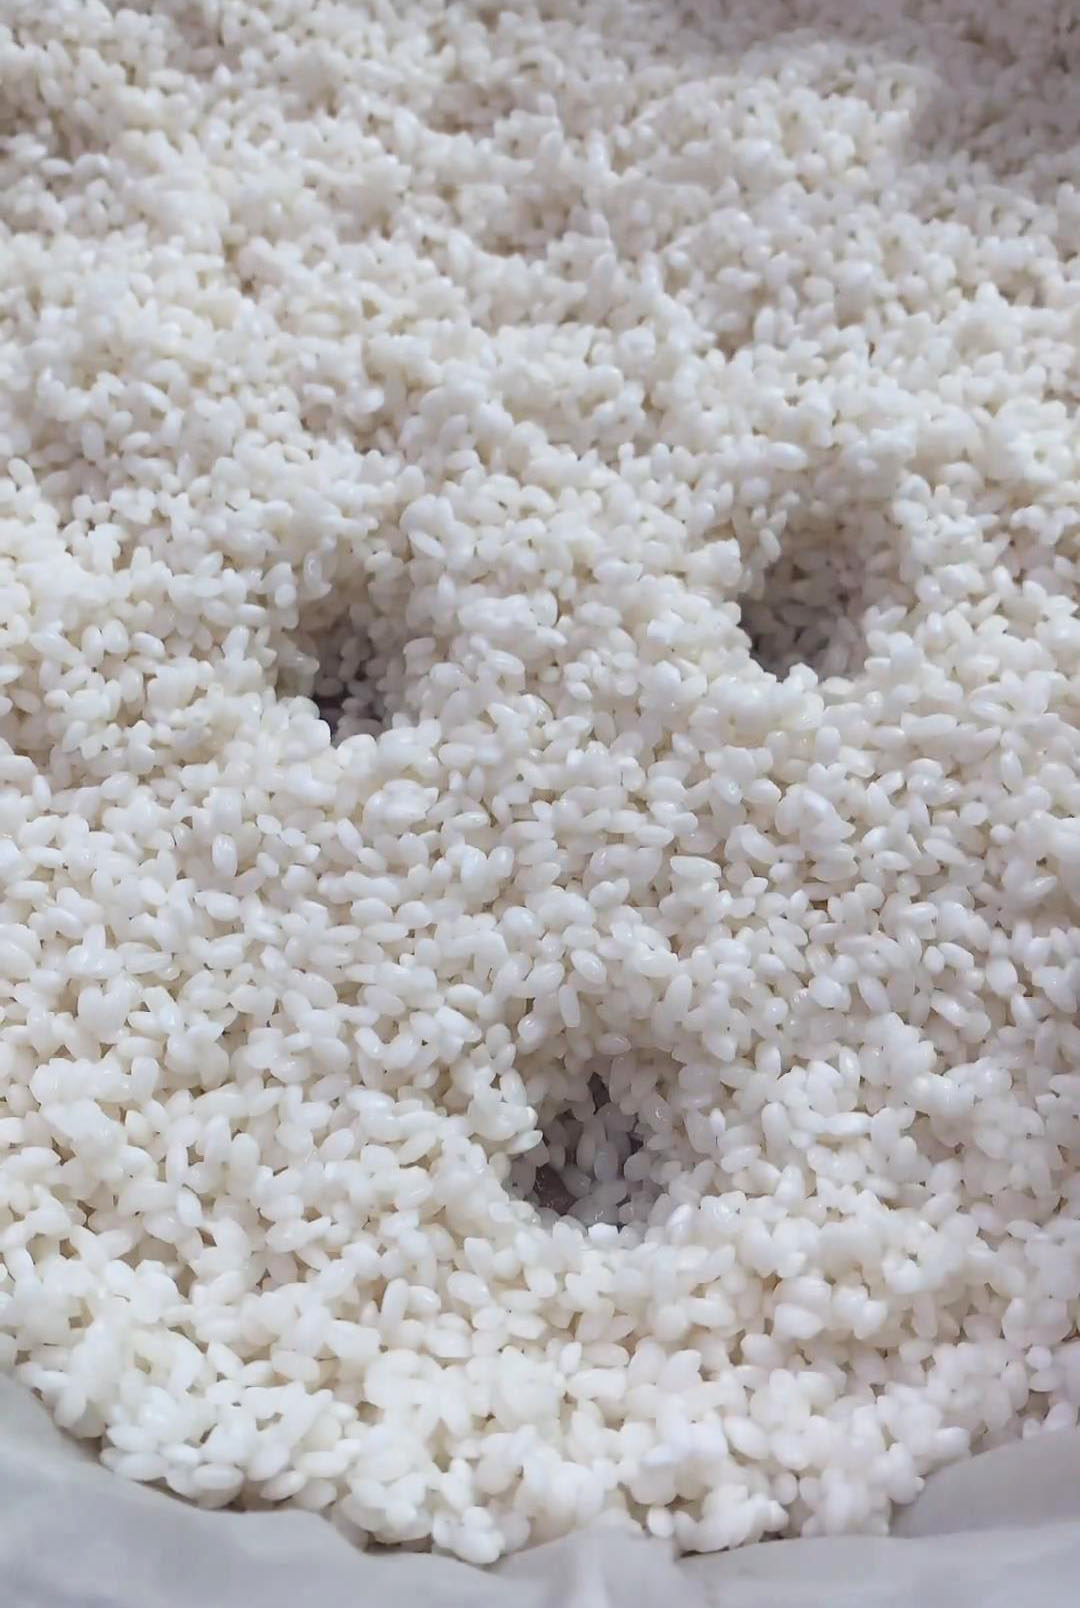 spread the rice evenly on a steamer tray lined with cloth and create holes in it